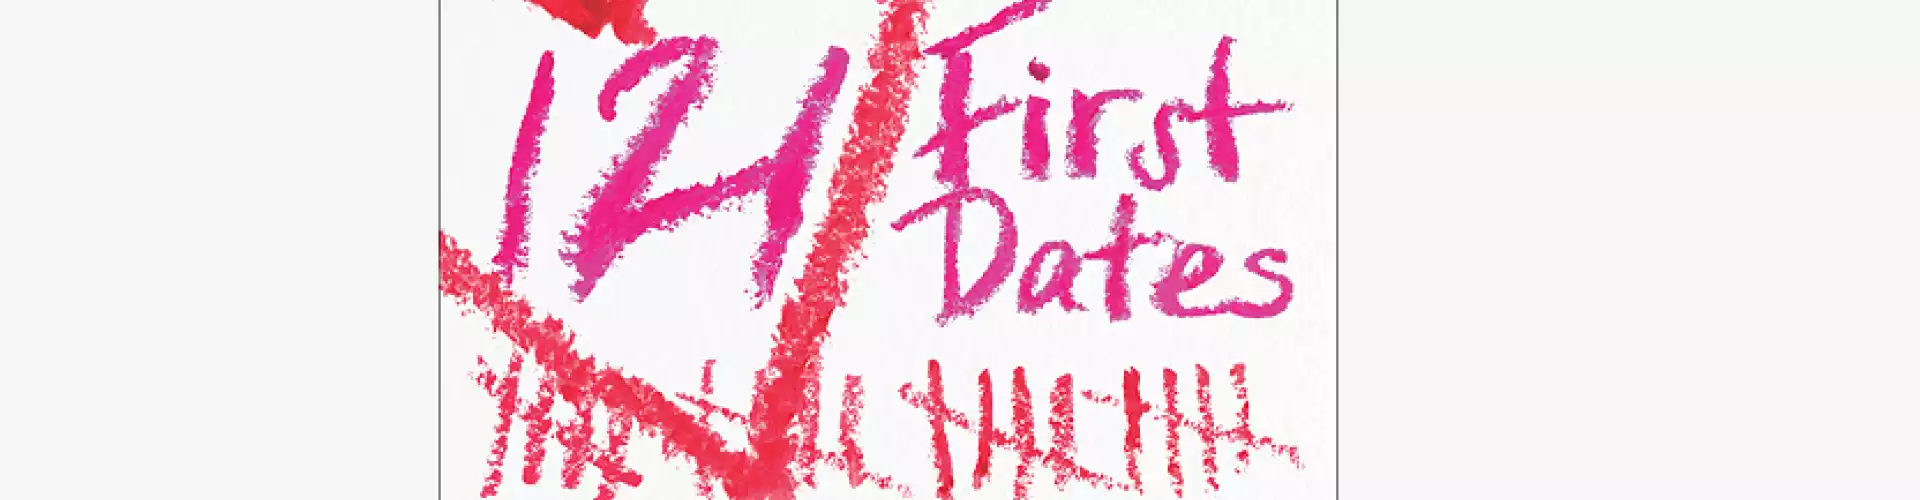 Lessons in Life & Love from 121 First Dates